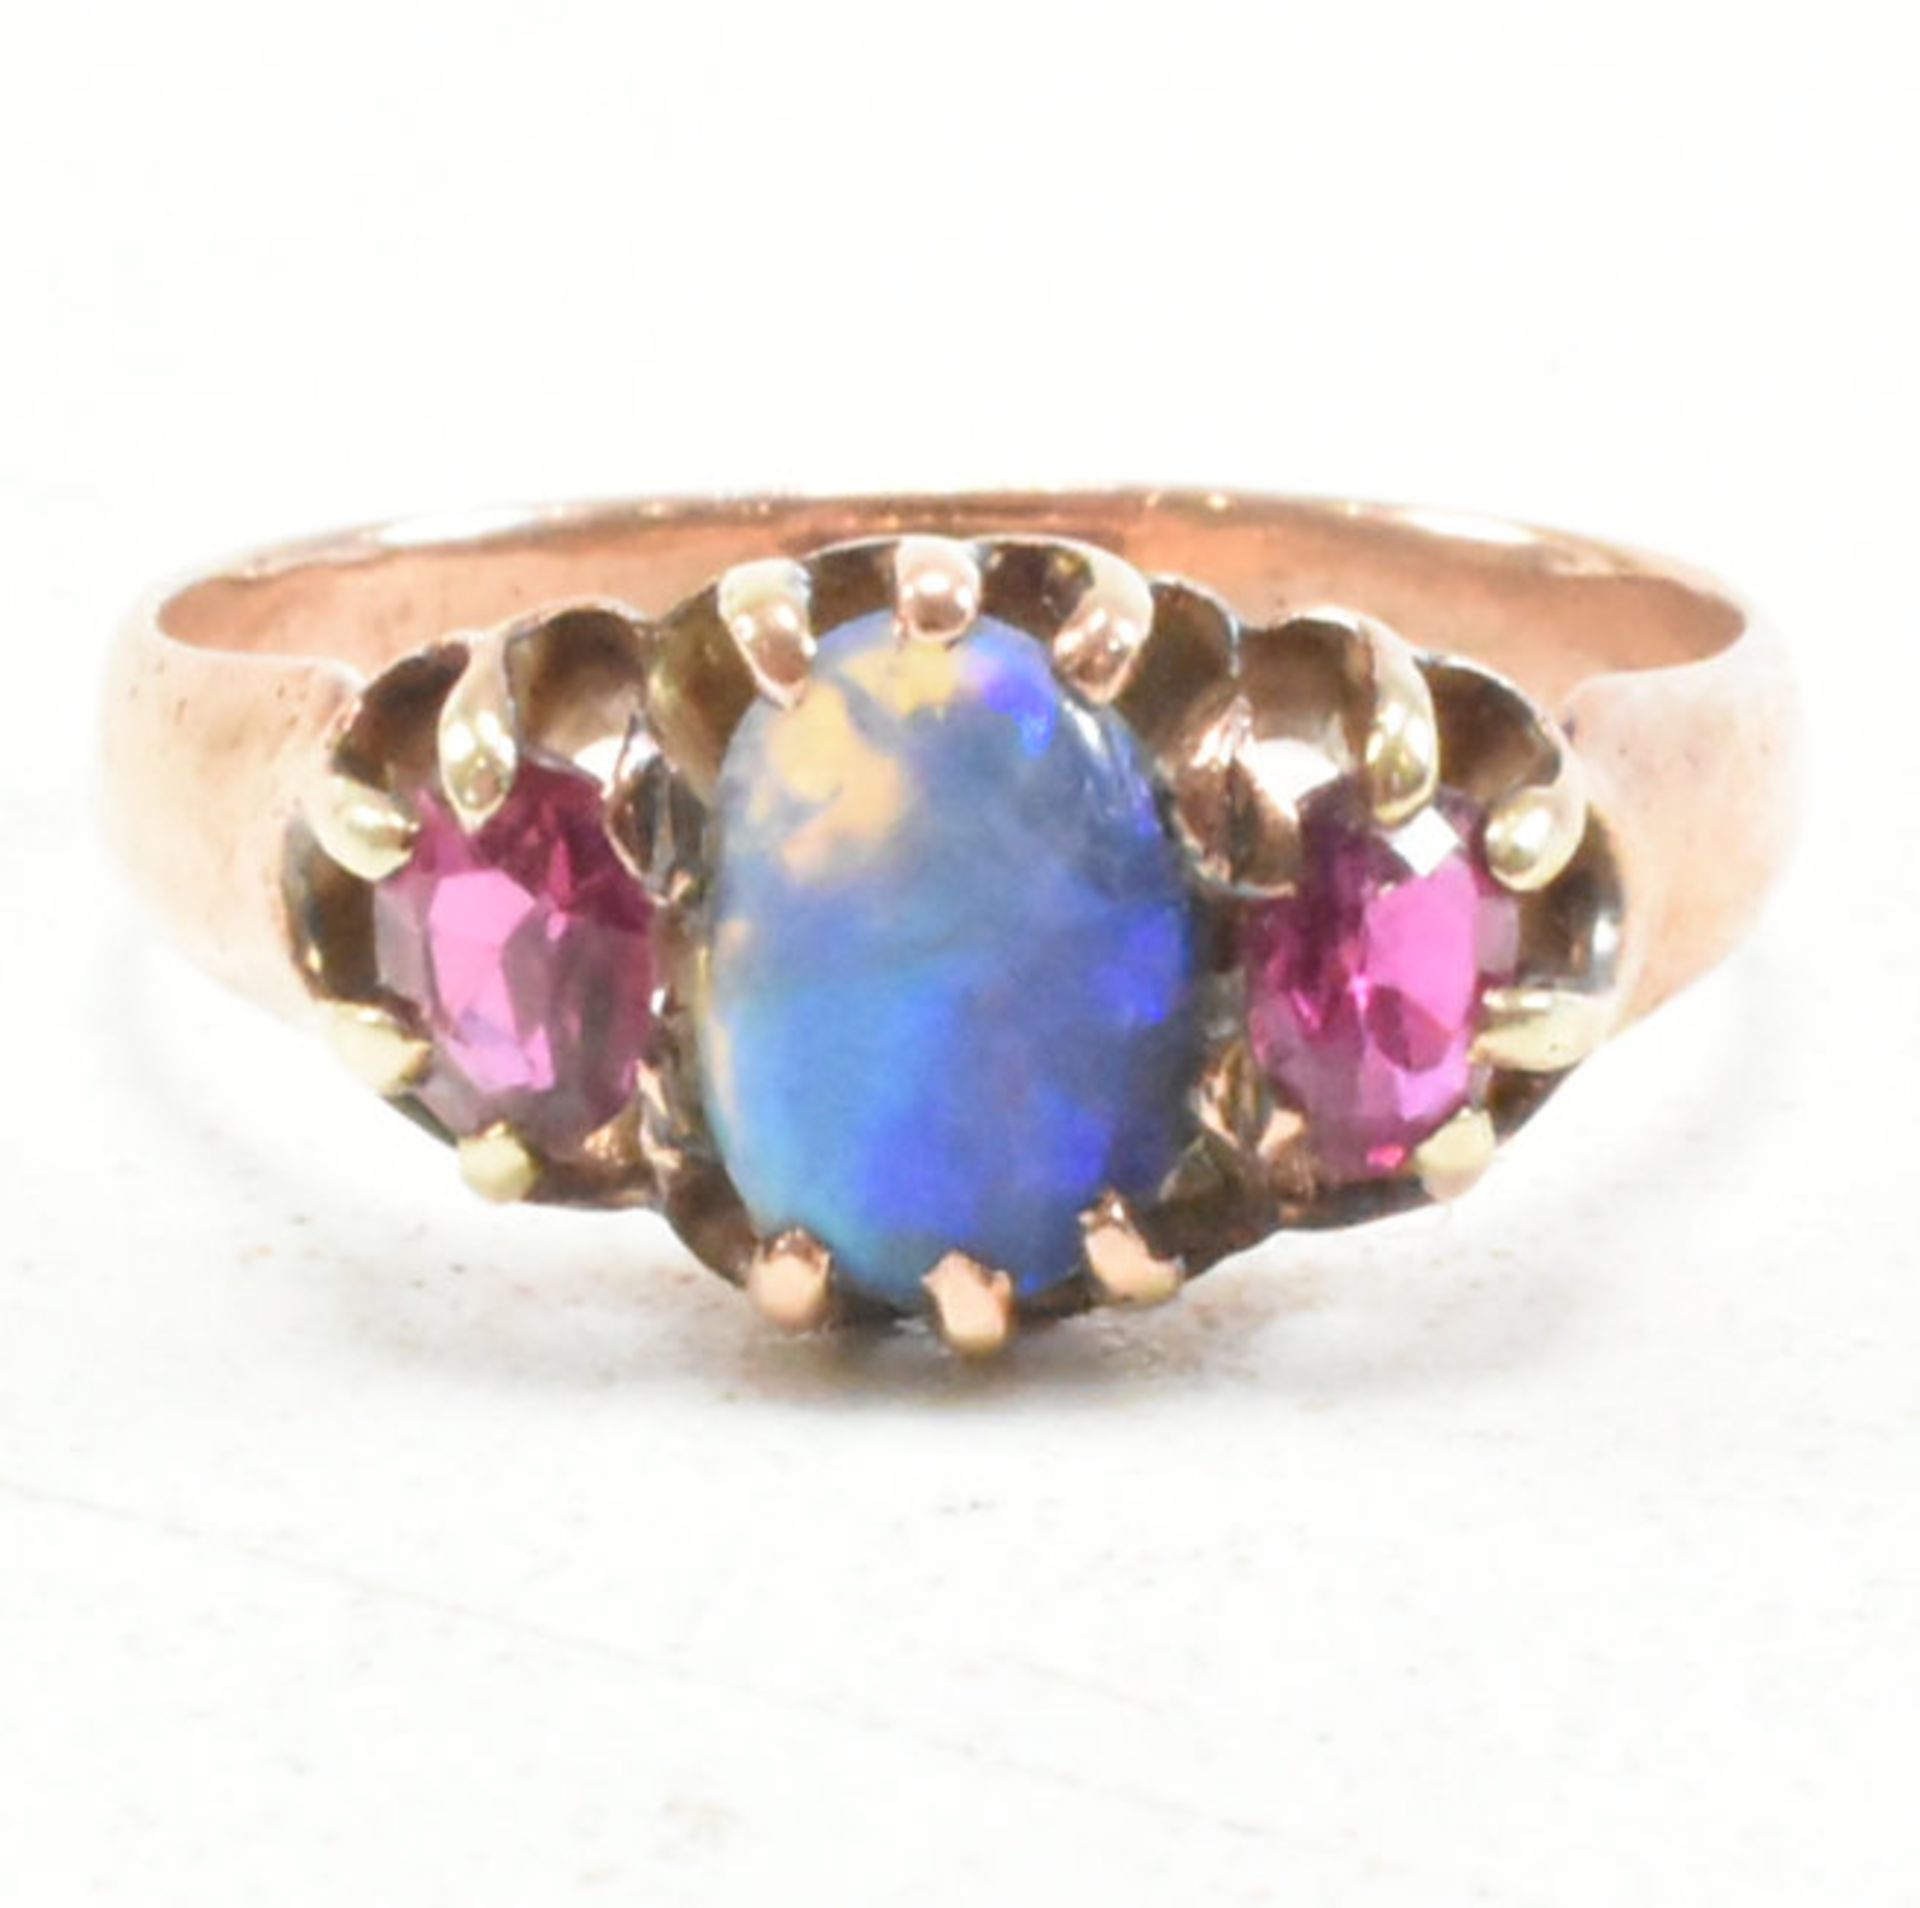 EARLY 20TH CENTURY GOLD OPAL & RUBY RING - Image 2 of 7